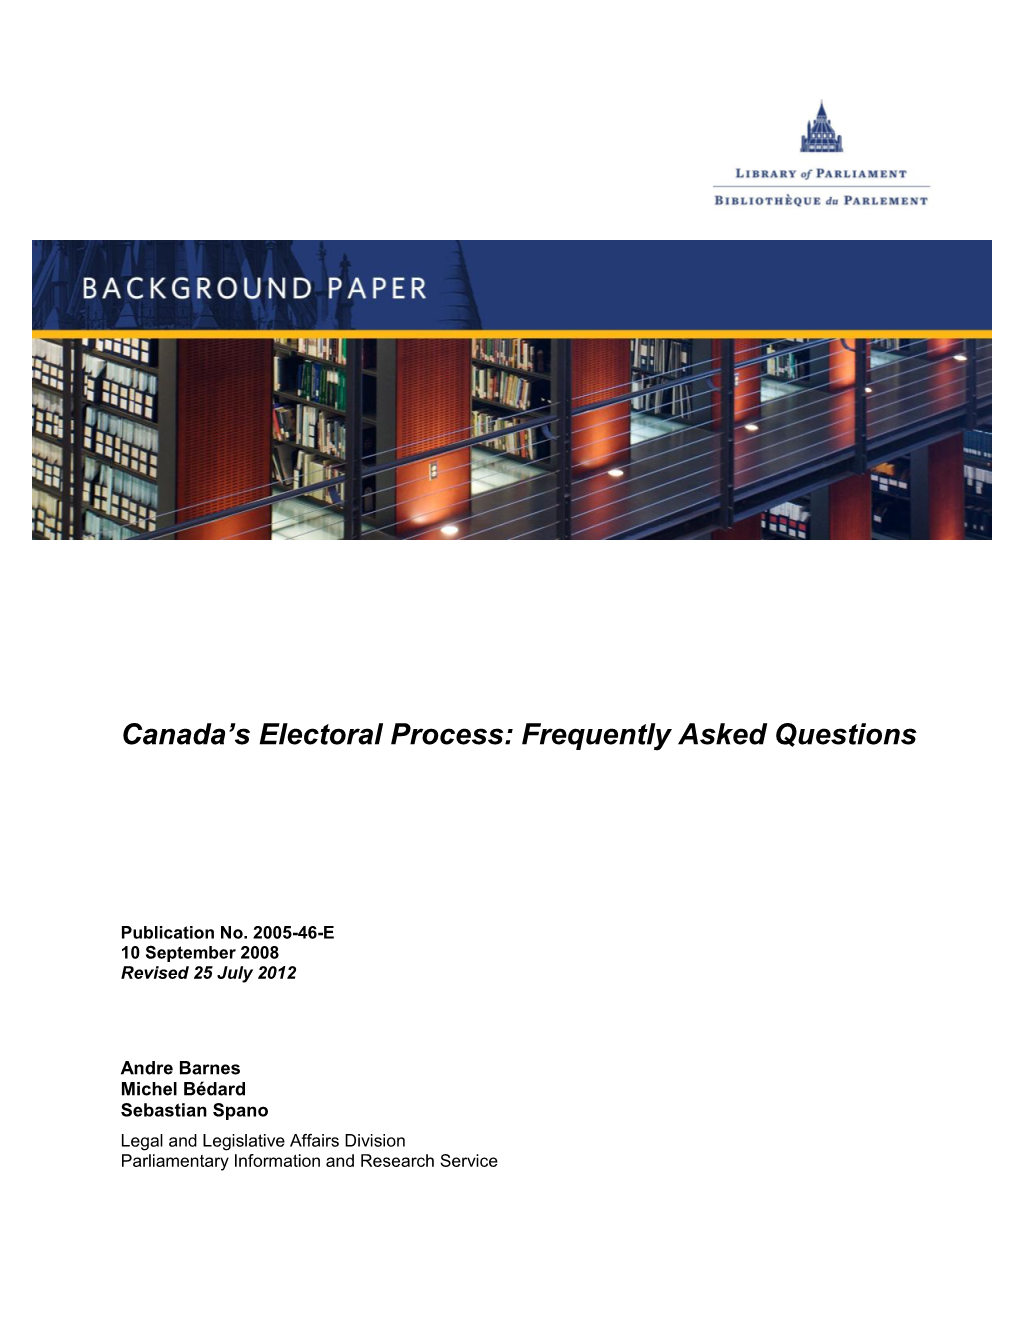 Canada's Electoral Process: Frequently Asked Questions